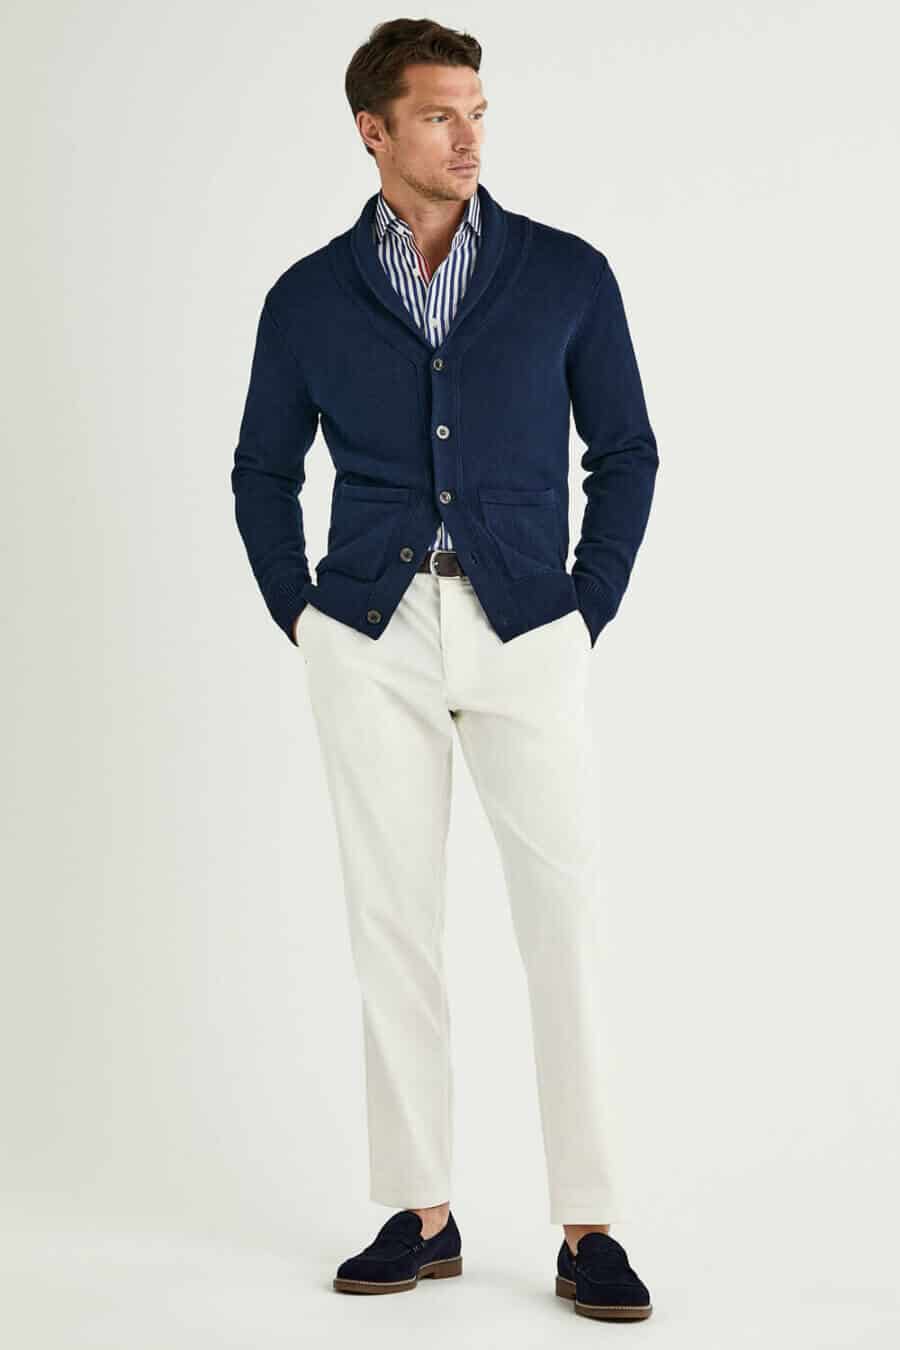 Men's summer knitwear outfit: shawl collar cardigan and white trousers